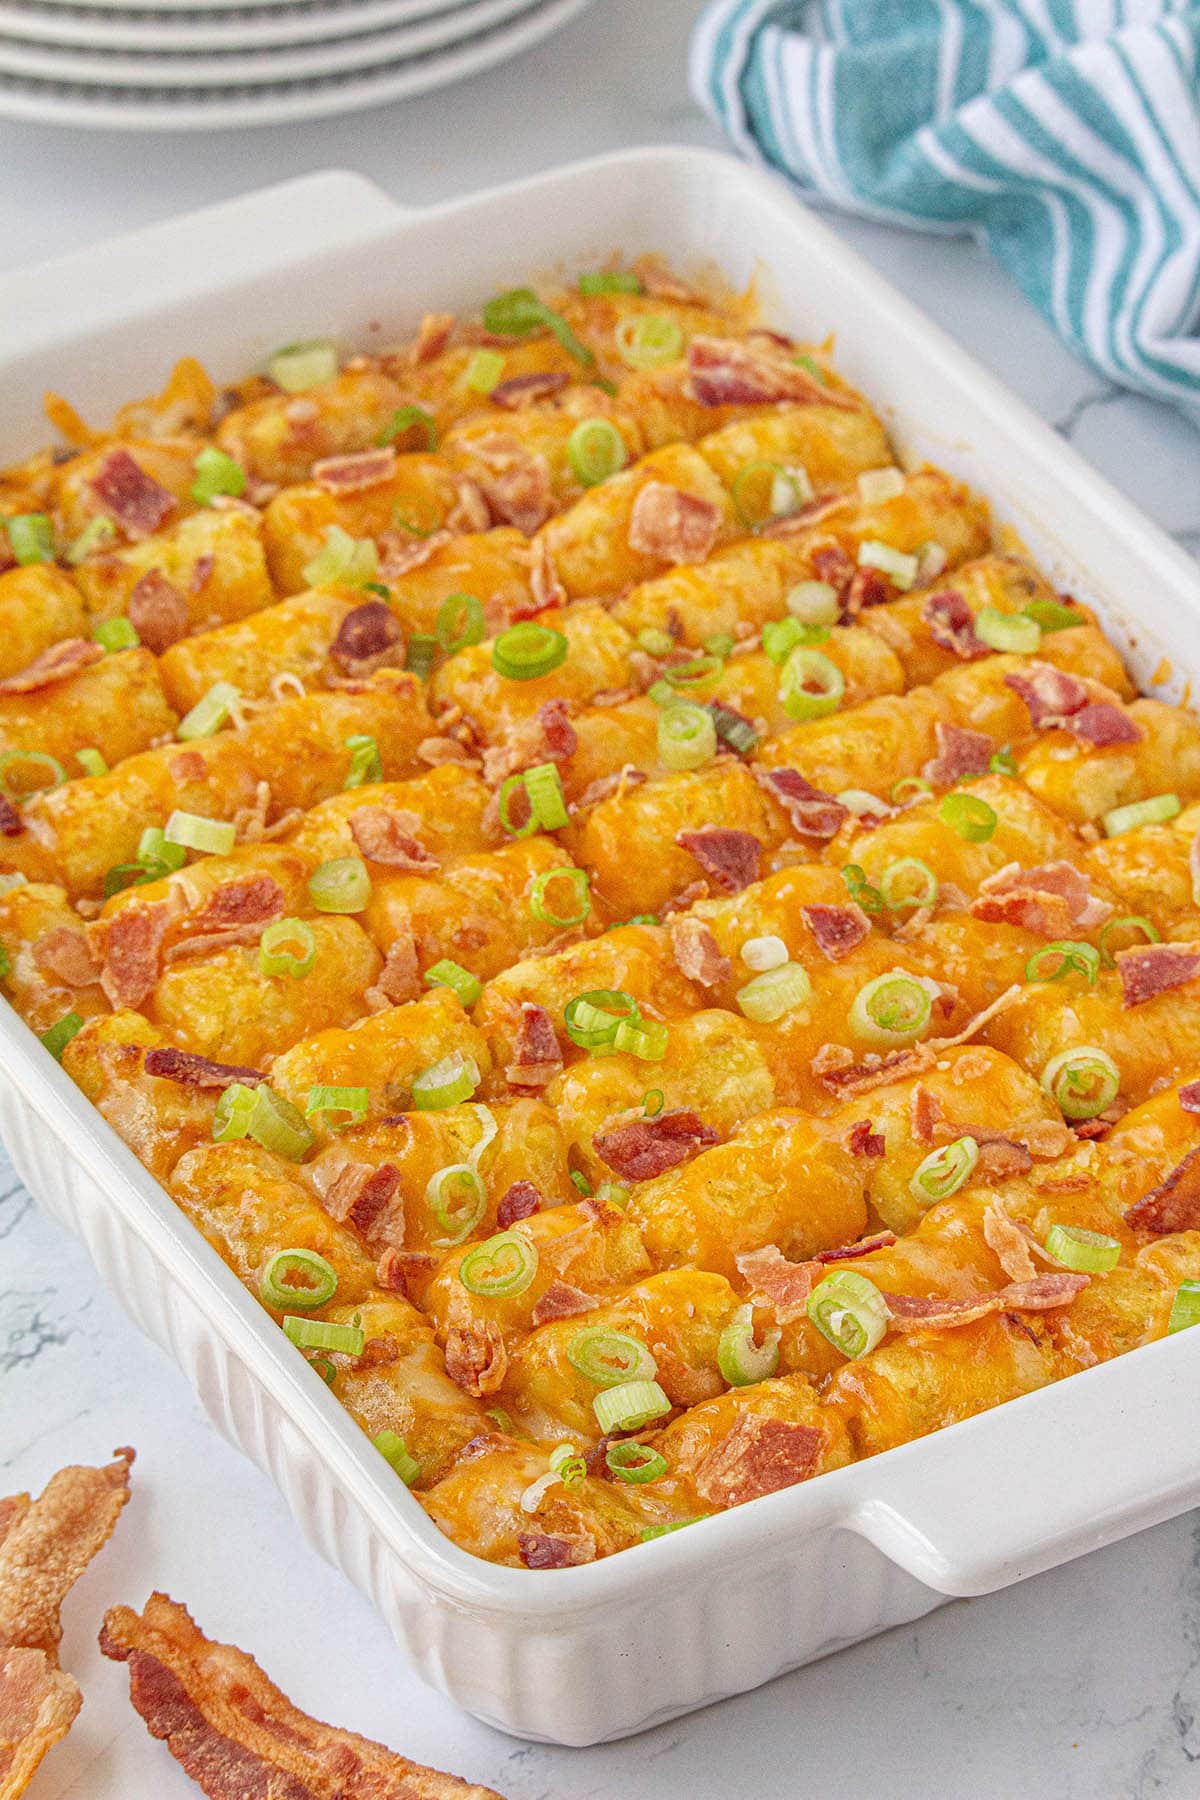 Chicken Bacon Ranch Tater Tot Casserole in baking dish.